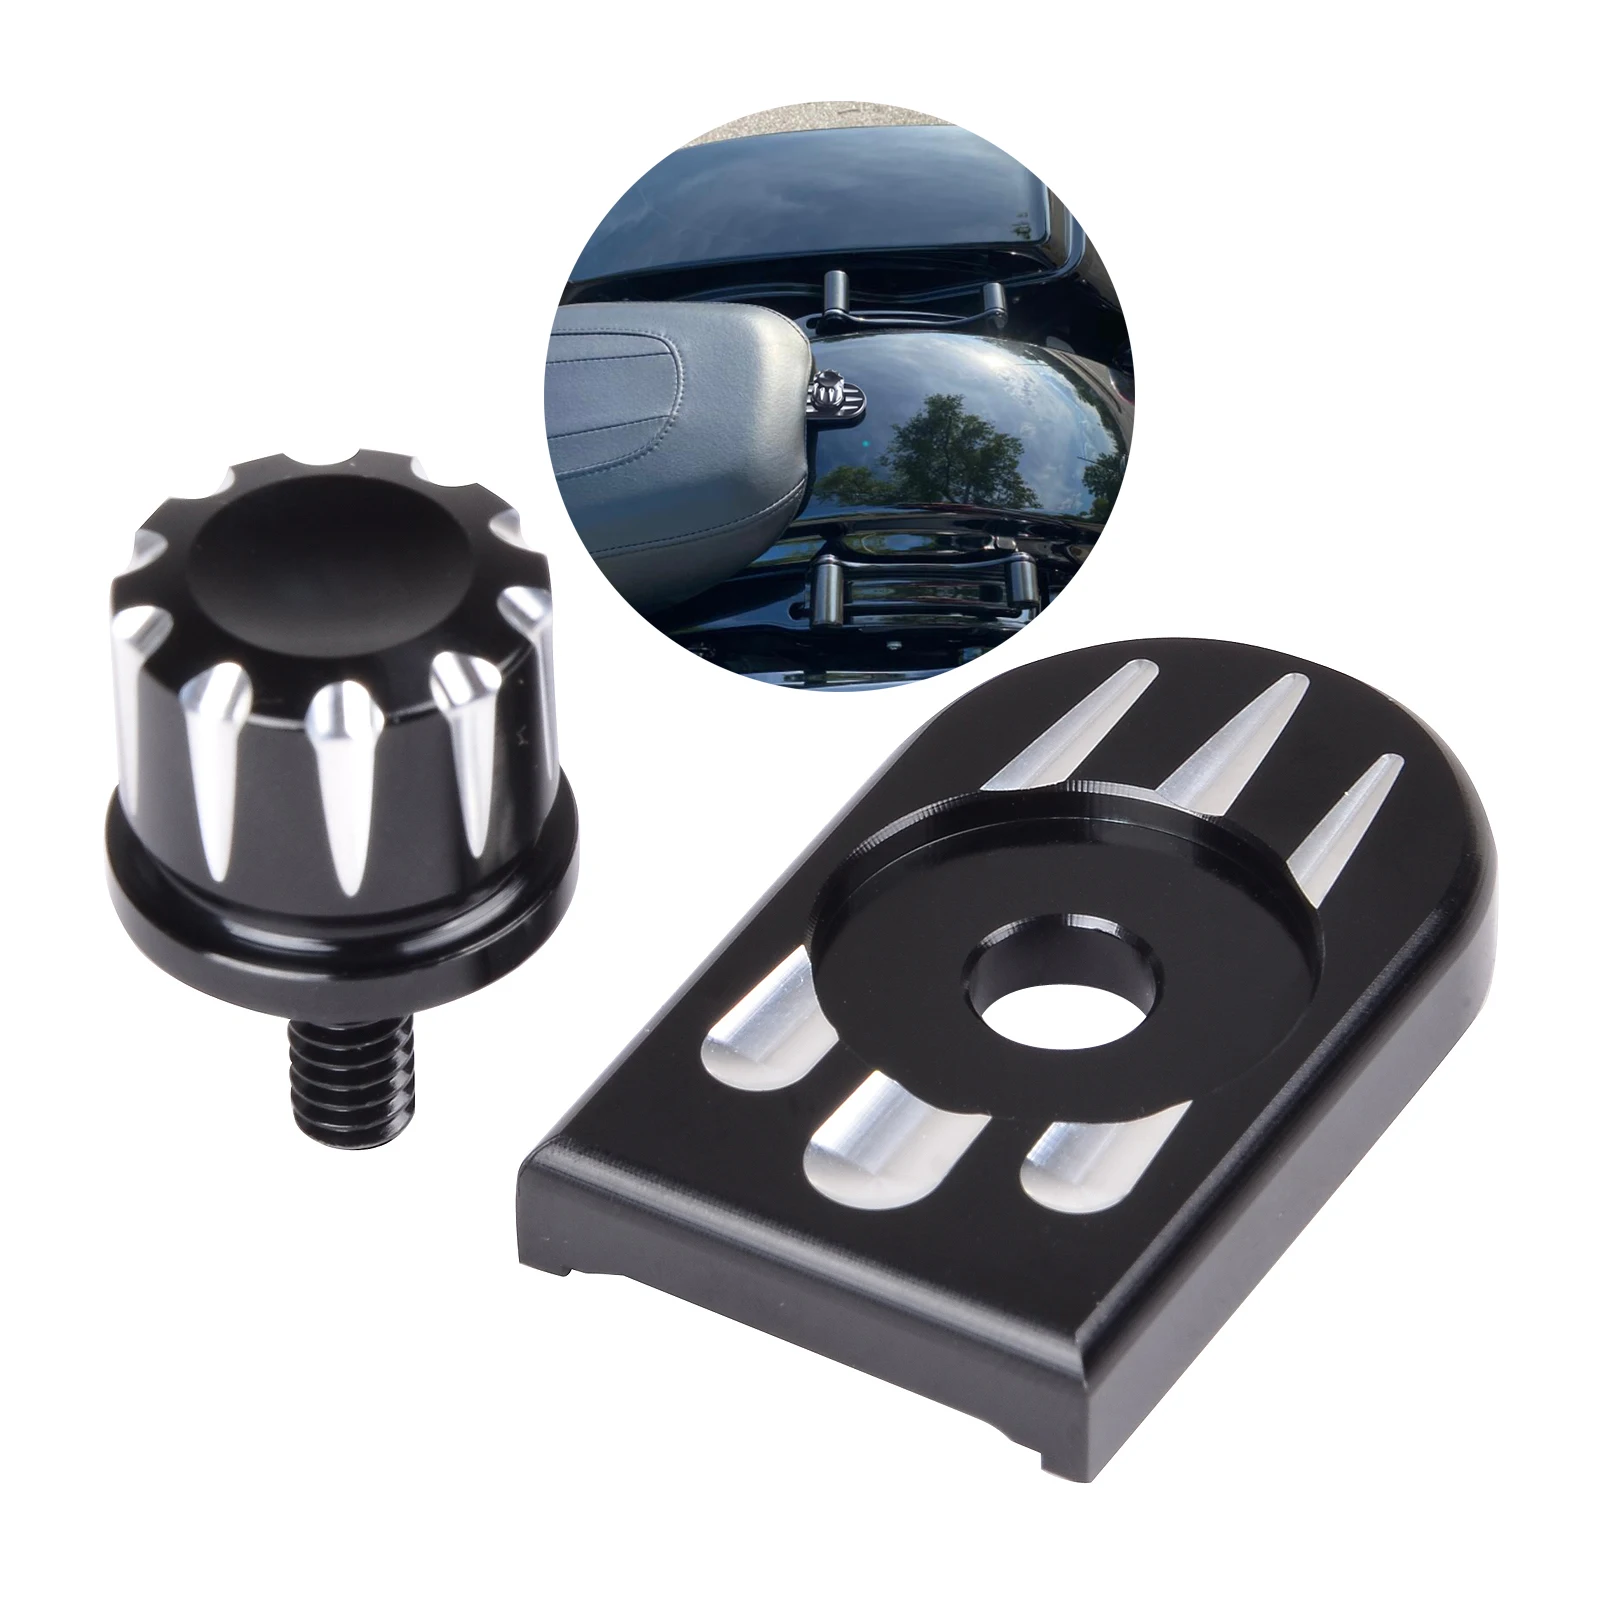 

Motorcycle Rear Seat Bolt Tab Screw Mount Knob Cover Kit Billet Aluminum CNC for Harley 1996-2017 Sportster CVO Touring Softail